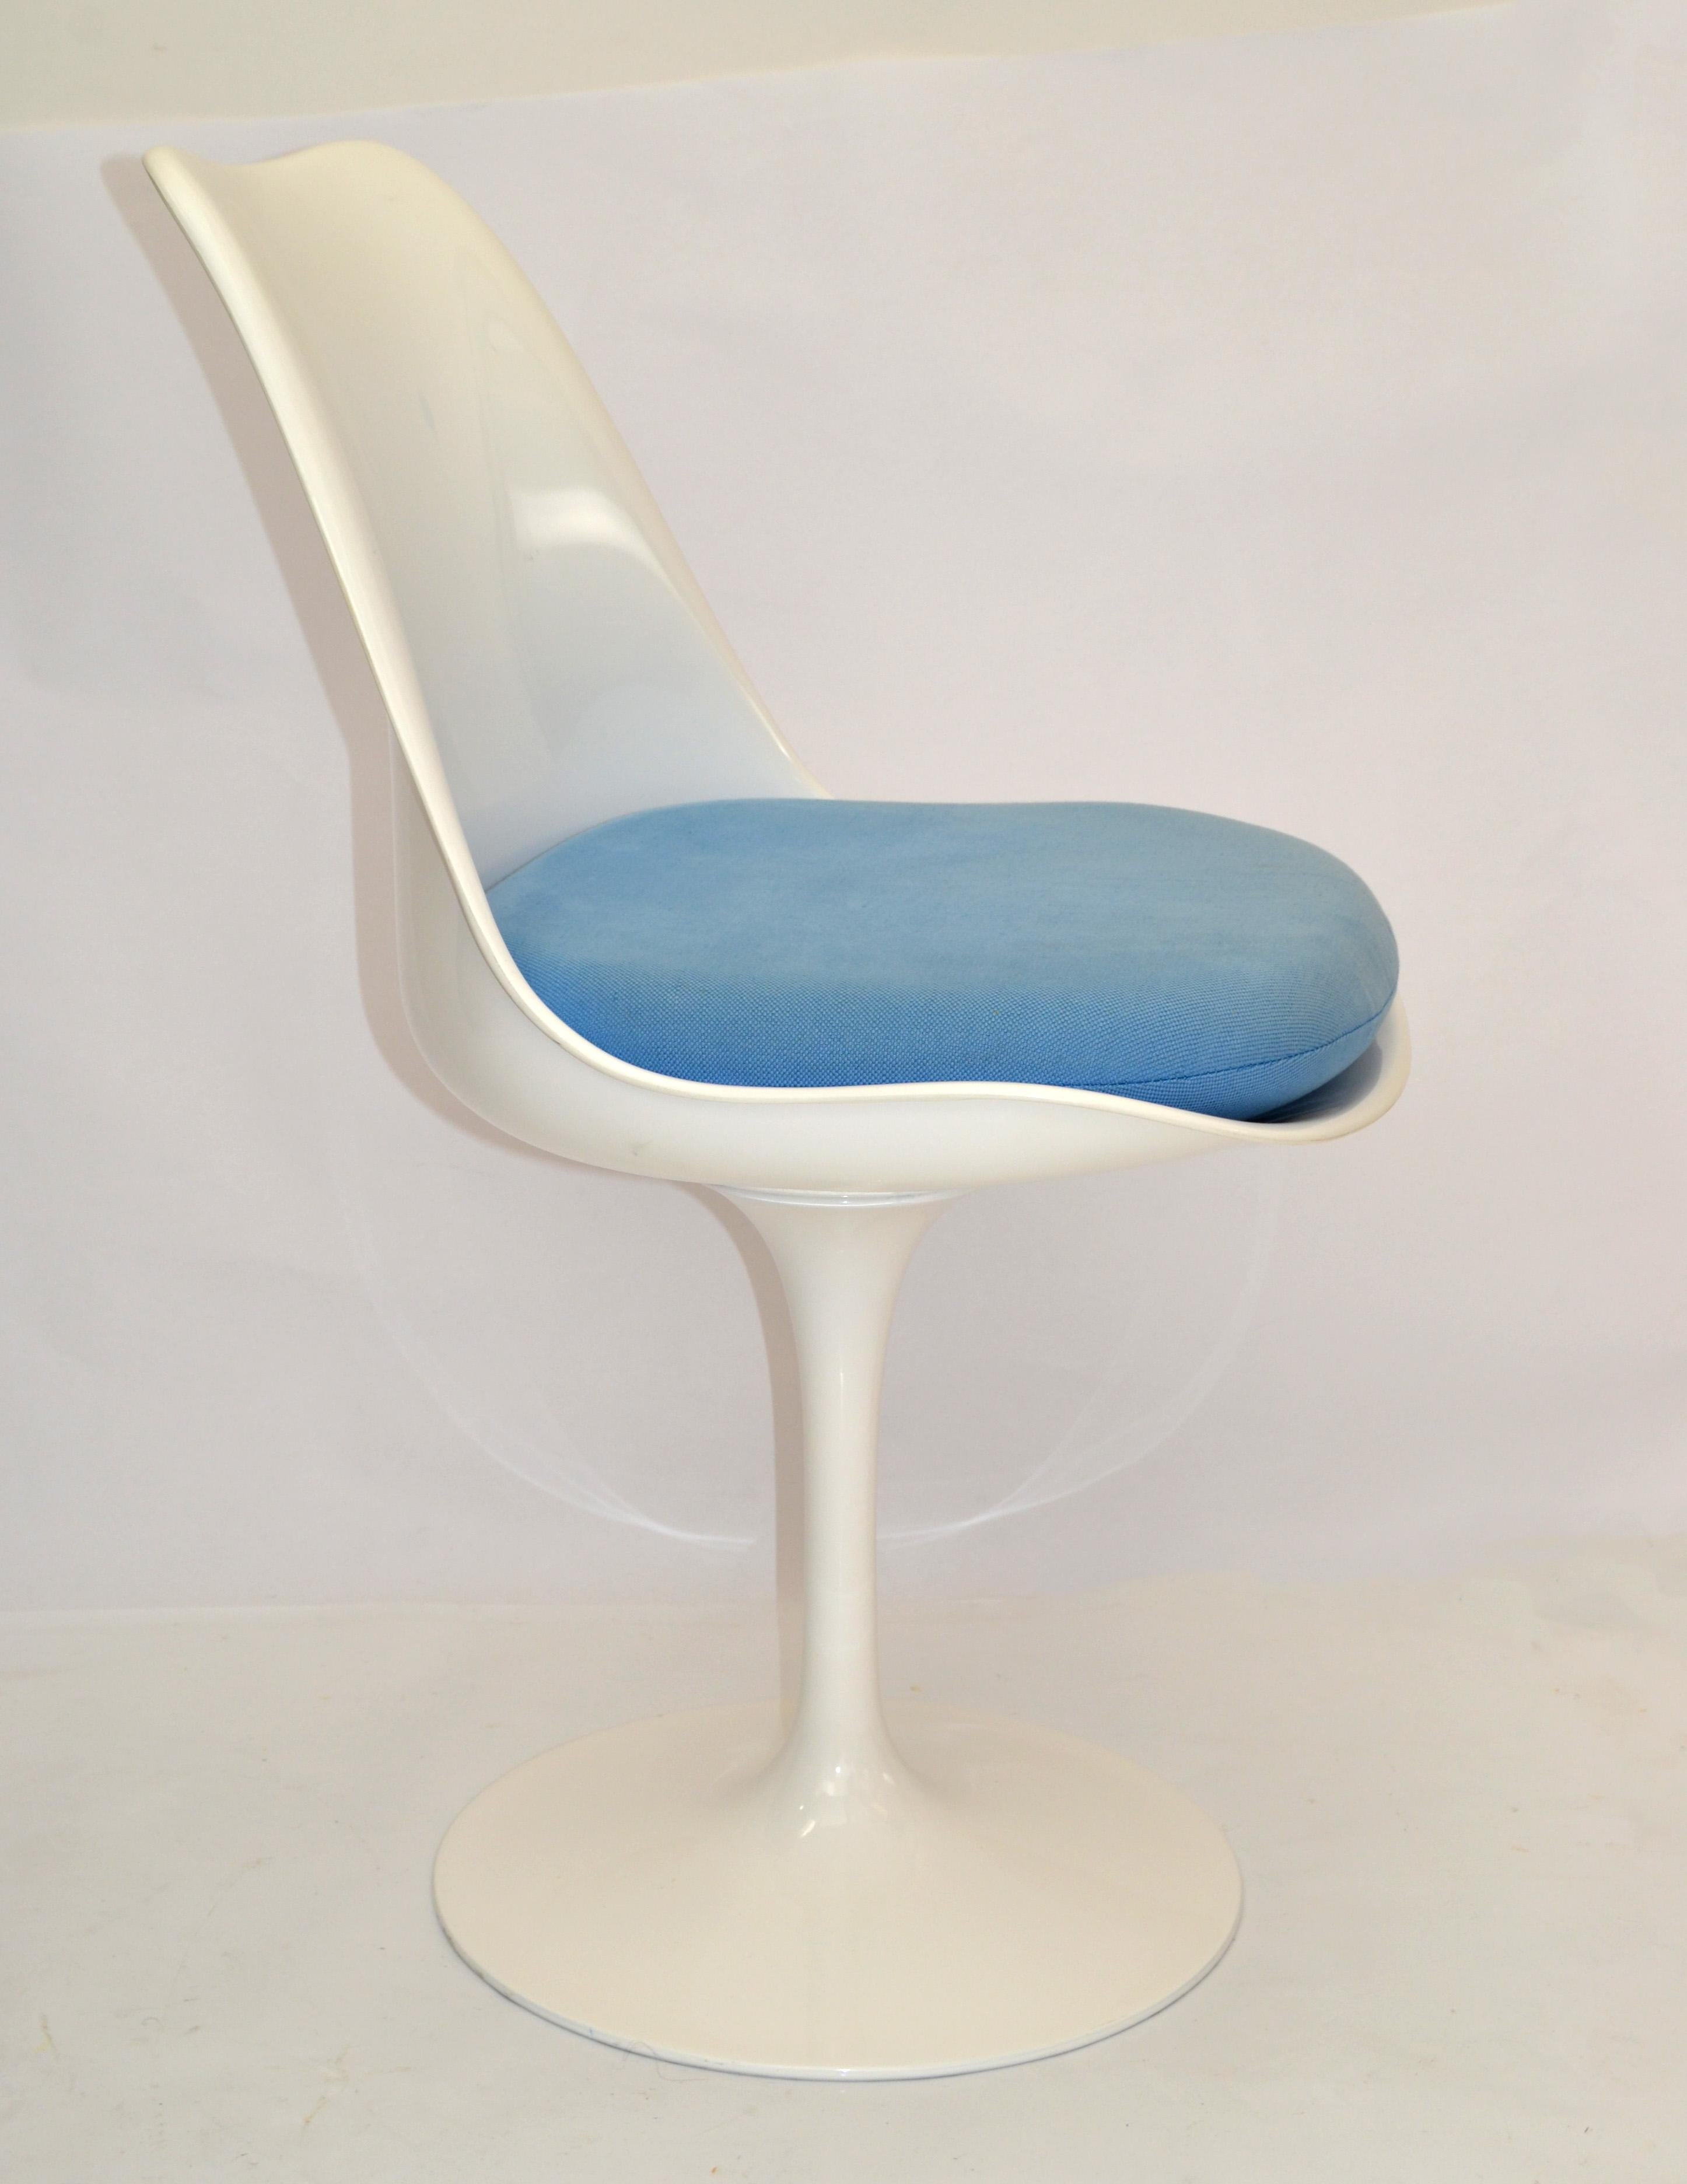 American Tulip Swivel Chair in the Style of Knoll Attributed to Eero Saarinen White Blue